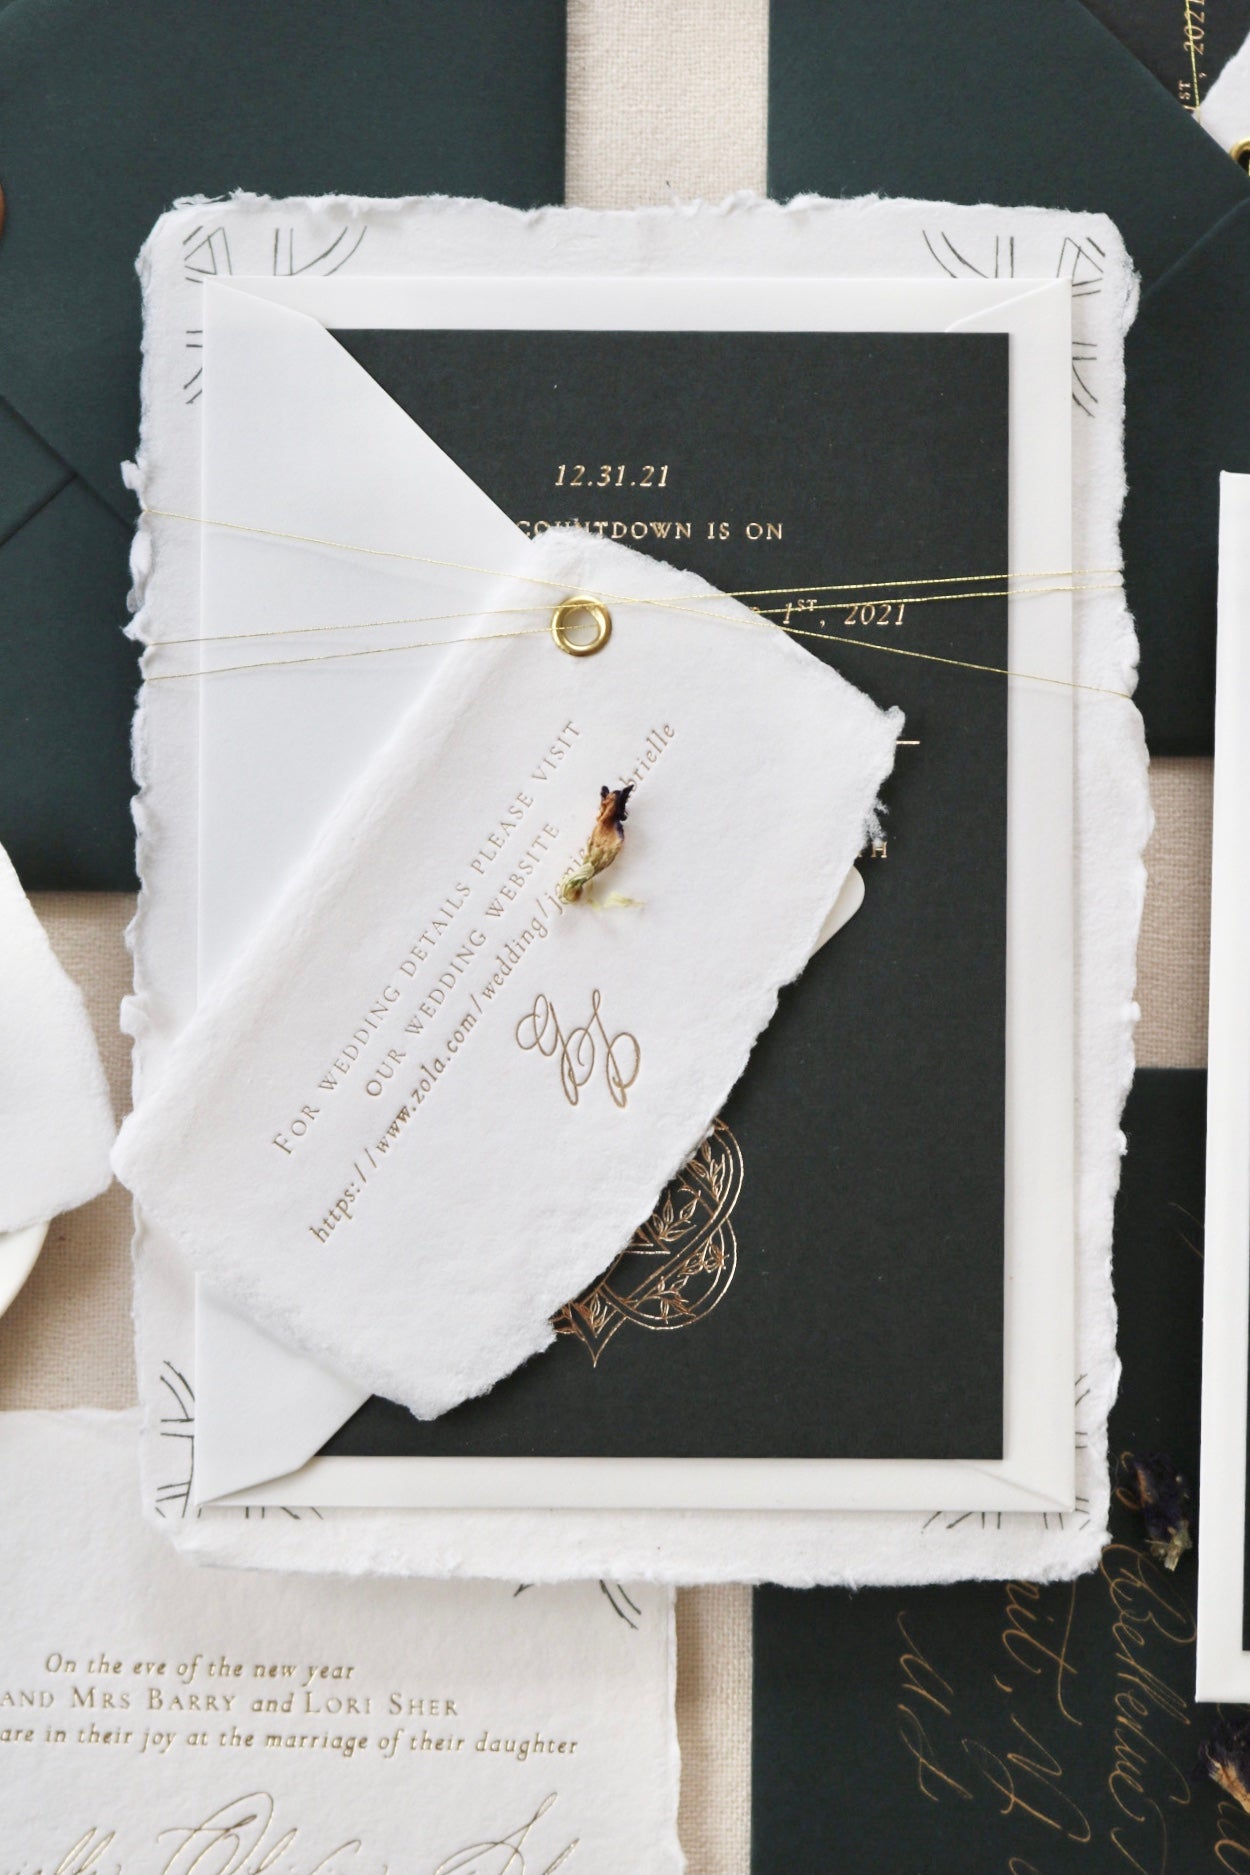 Elevate your wedding invitations with hot foil printing on handmade paper. Expert insights and inspiring examples in our latest article.